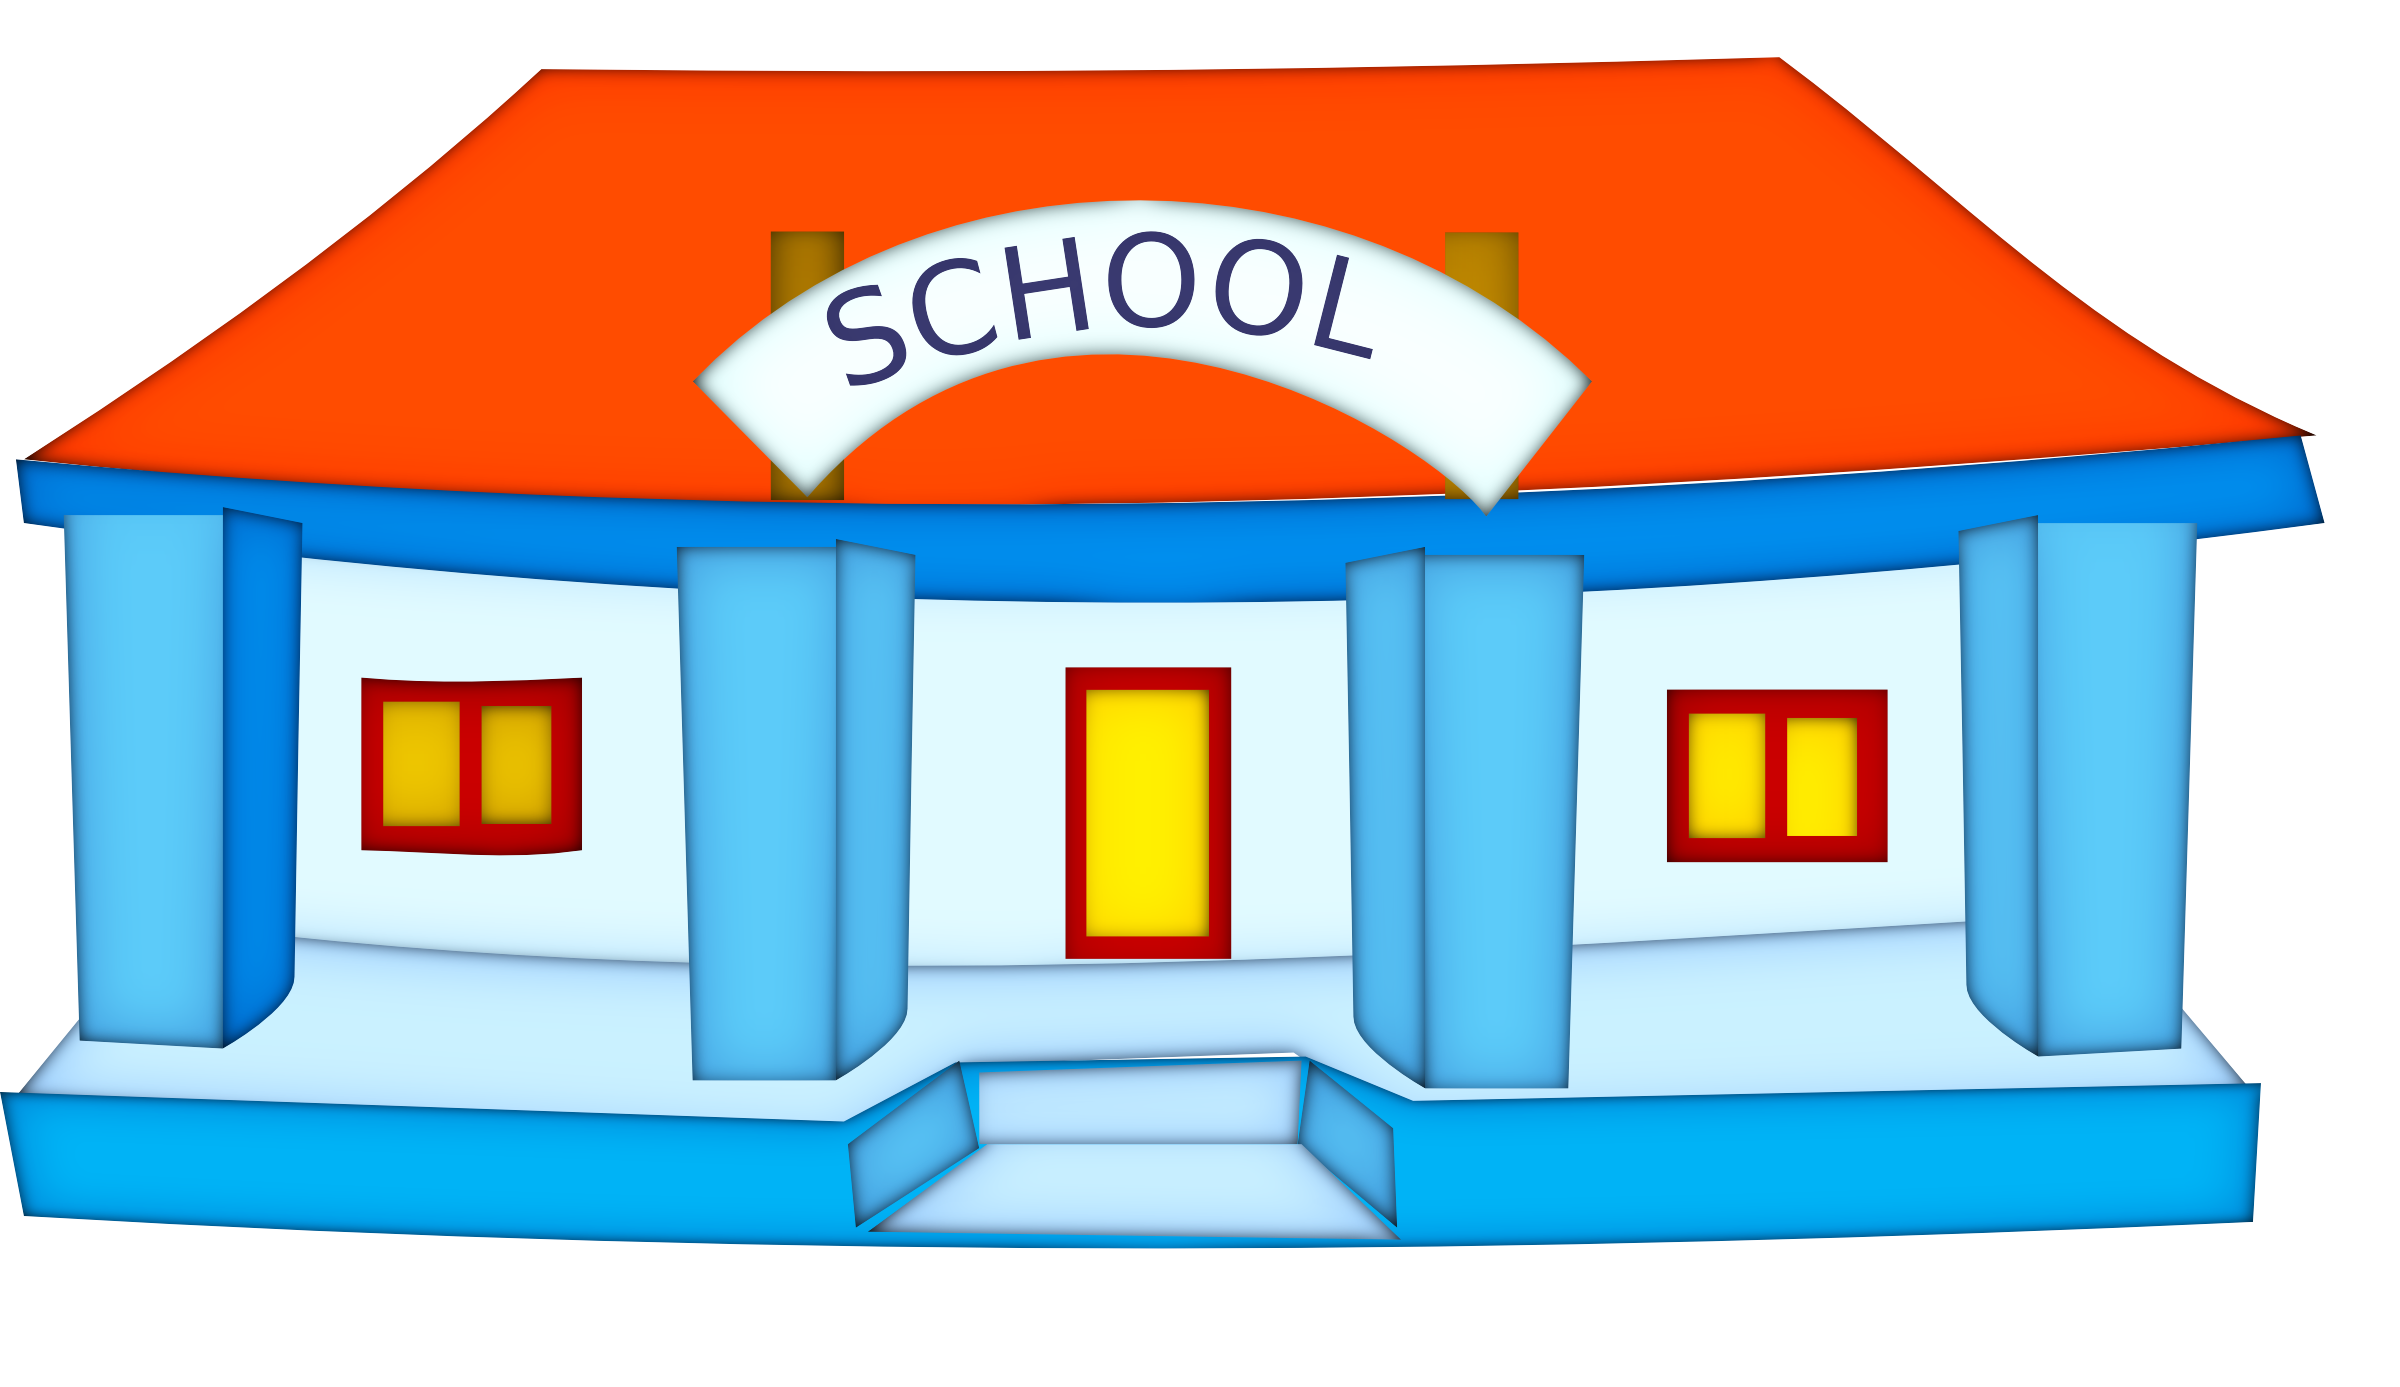 School Images Hd Photo Clipart